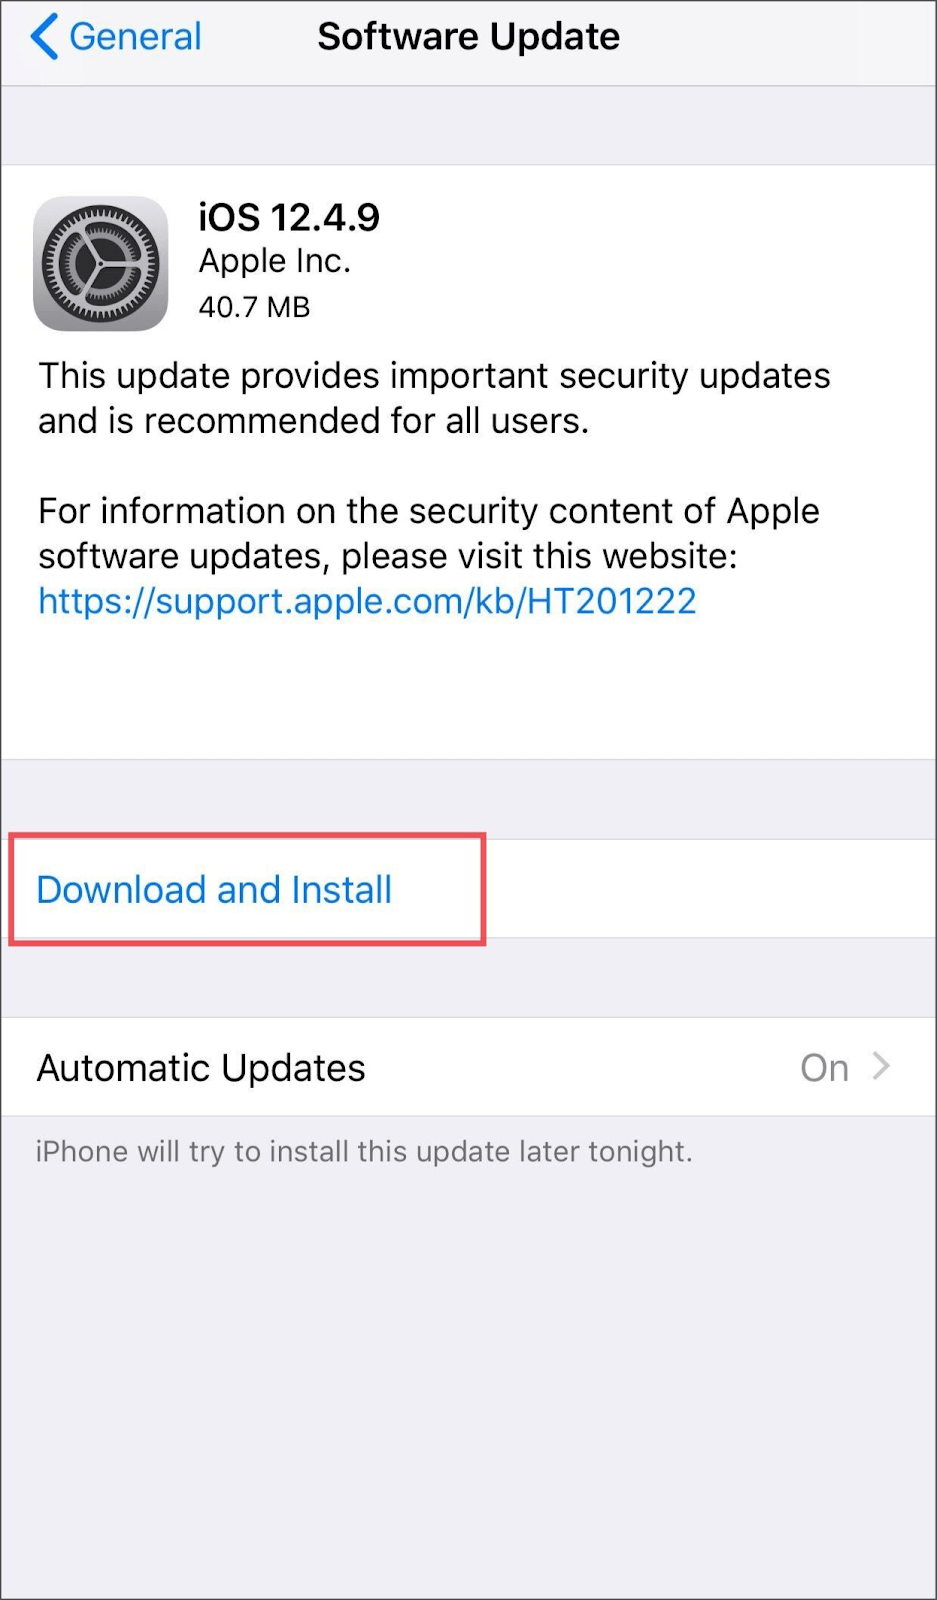 Download and Install the new update